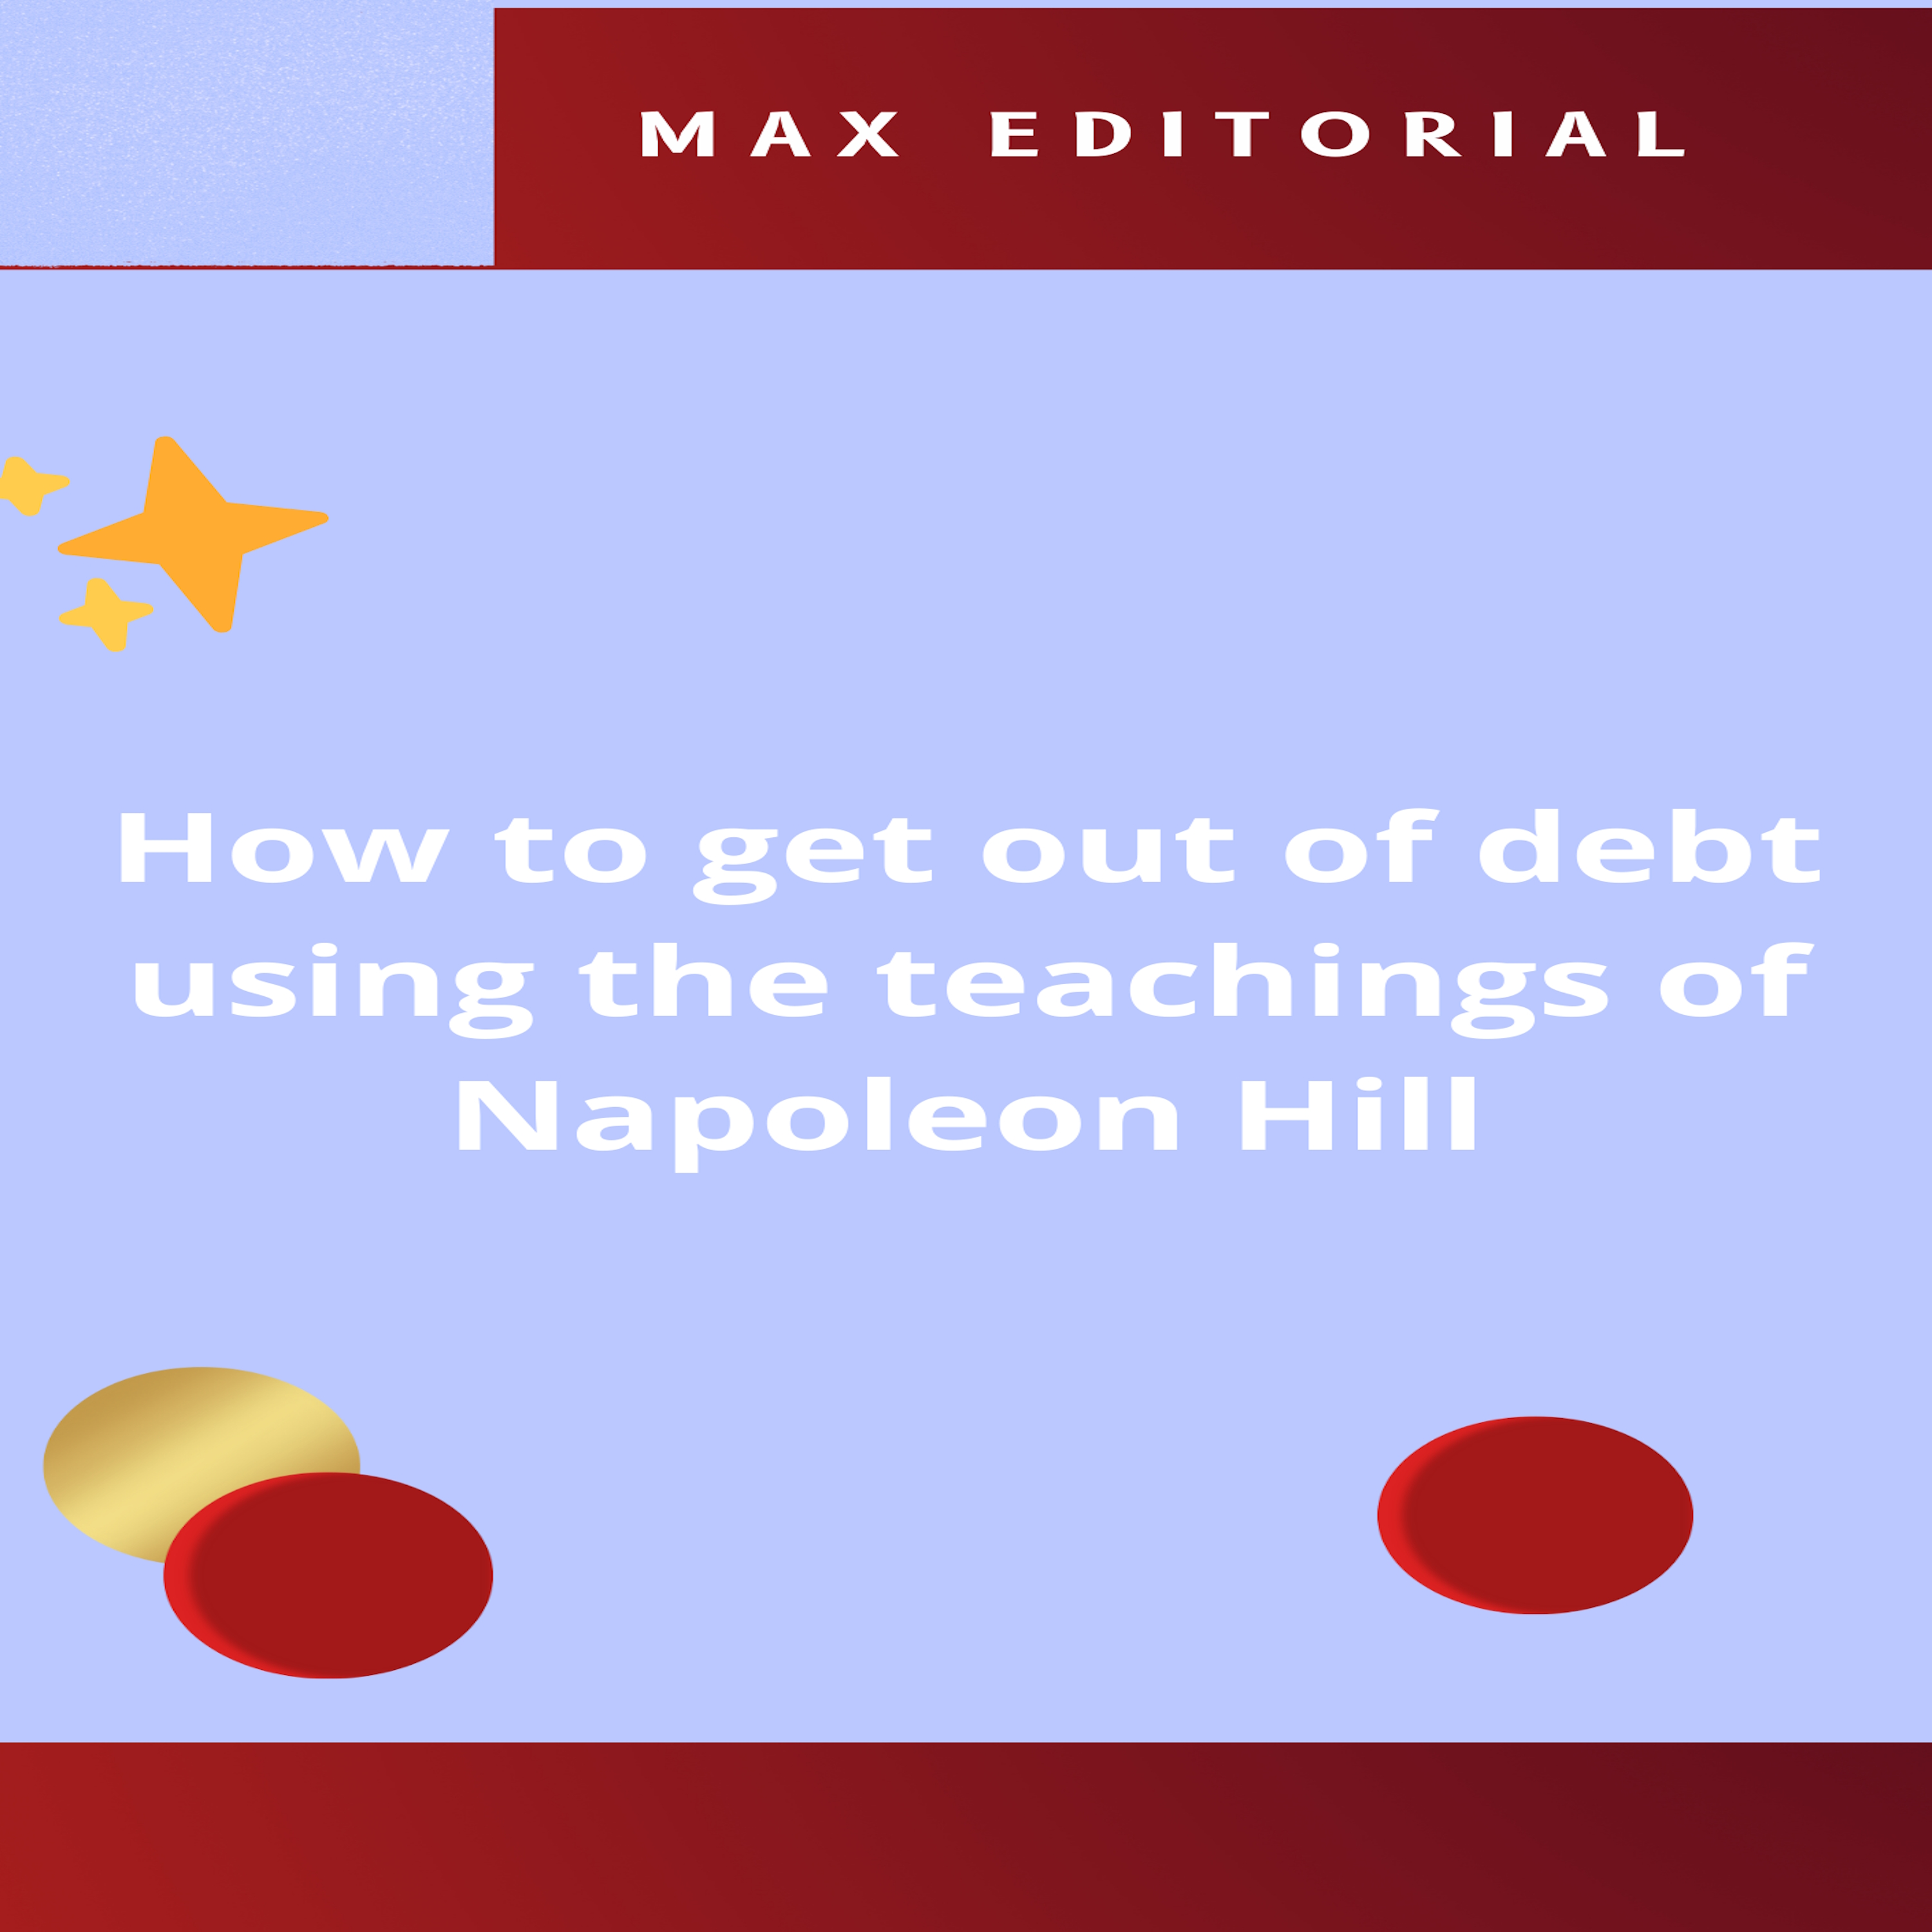 How to get out of debt using the teachings of Napoleon Hill